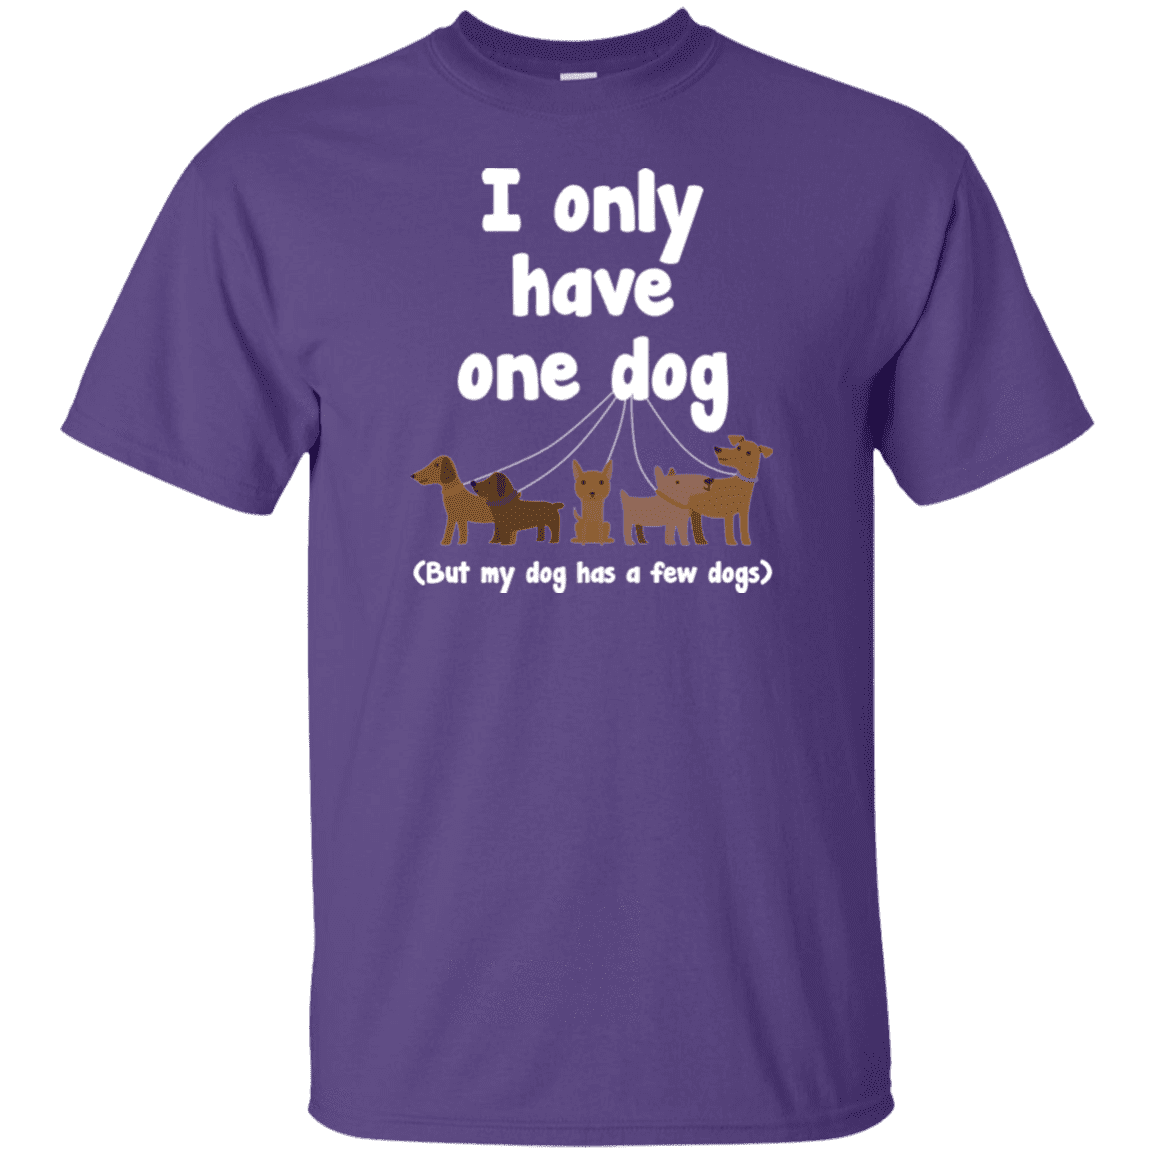 I Only Have 1 Dog - Youth T Shirt.